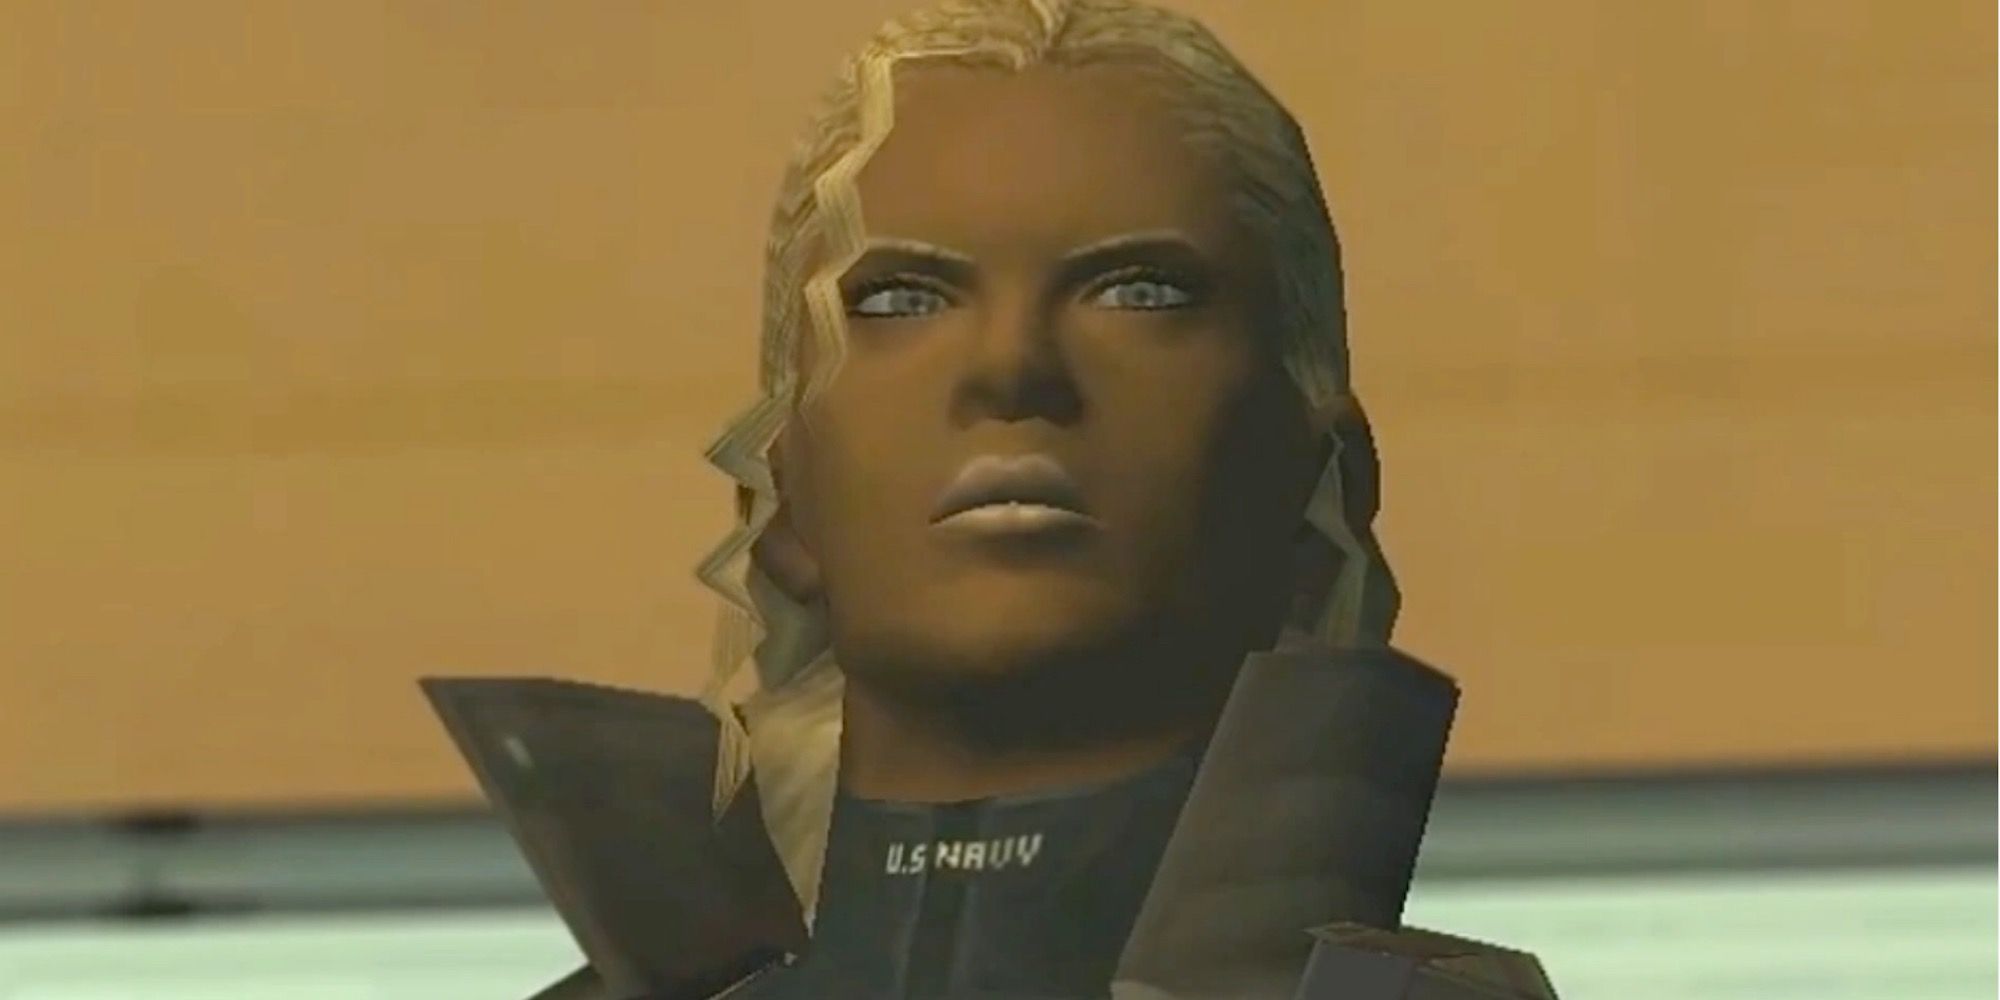 Fortune from Metal Gear Solid 2